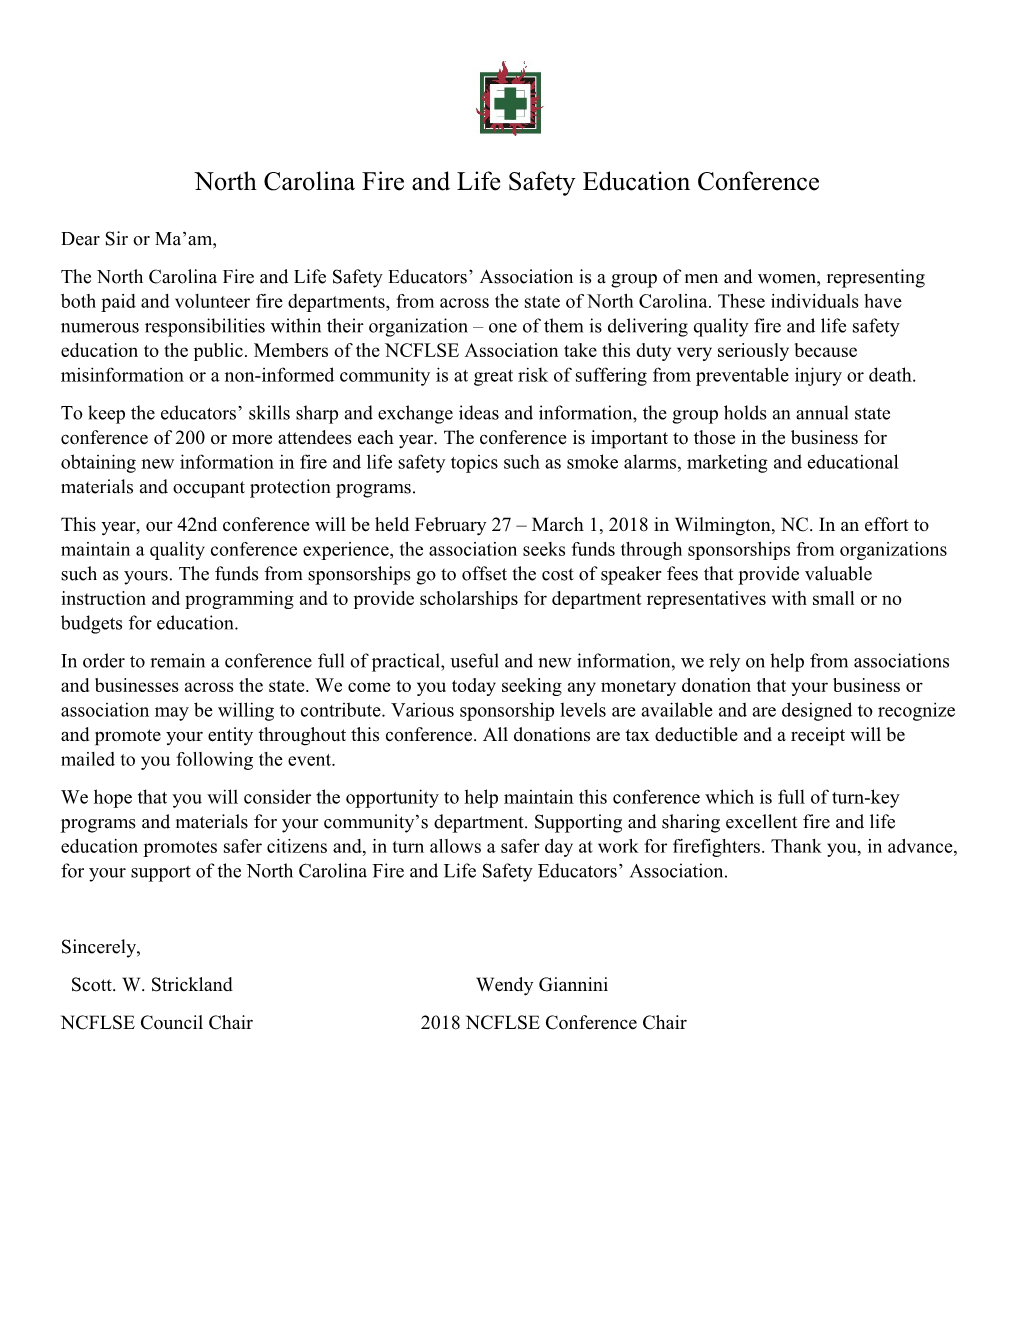 North Carolina Fire and Life Safety Education Conference